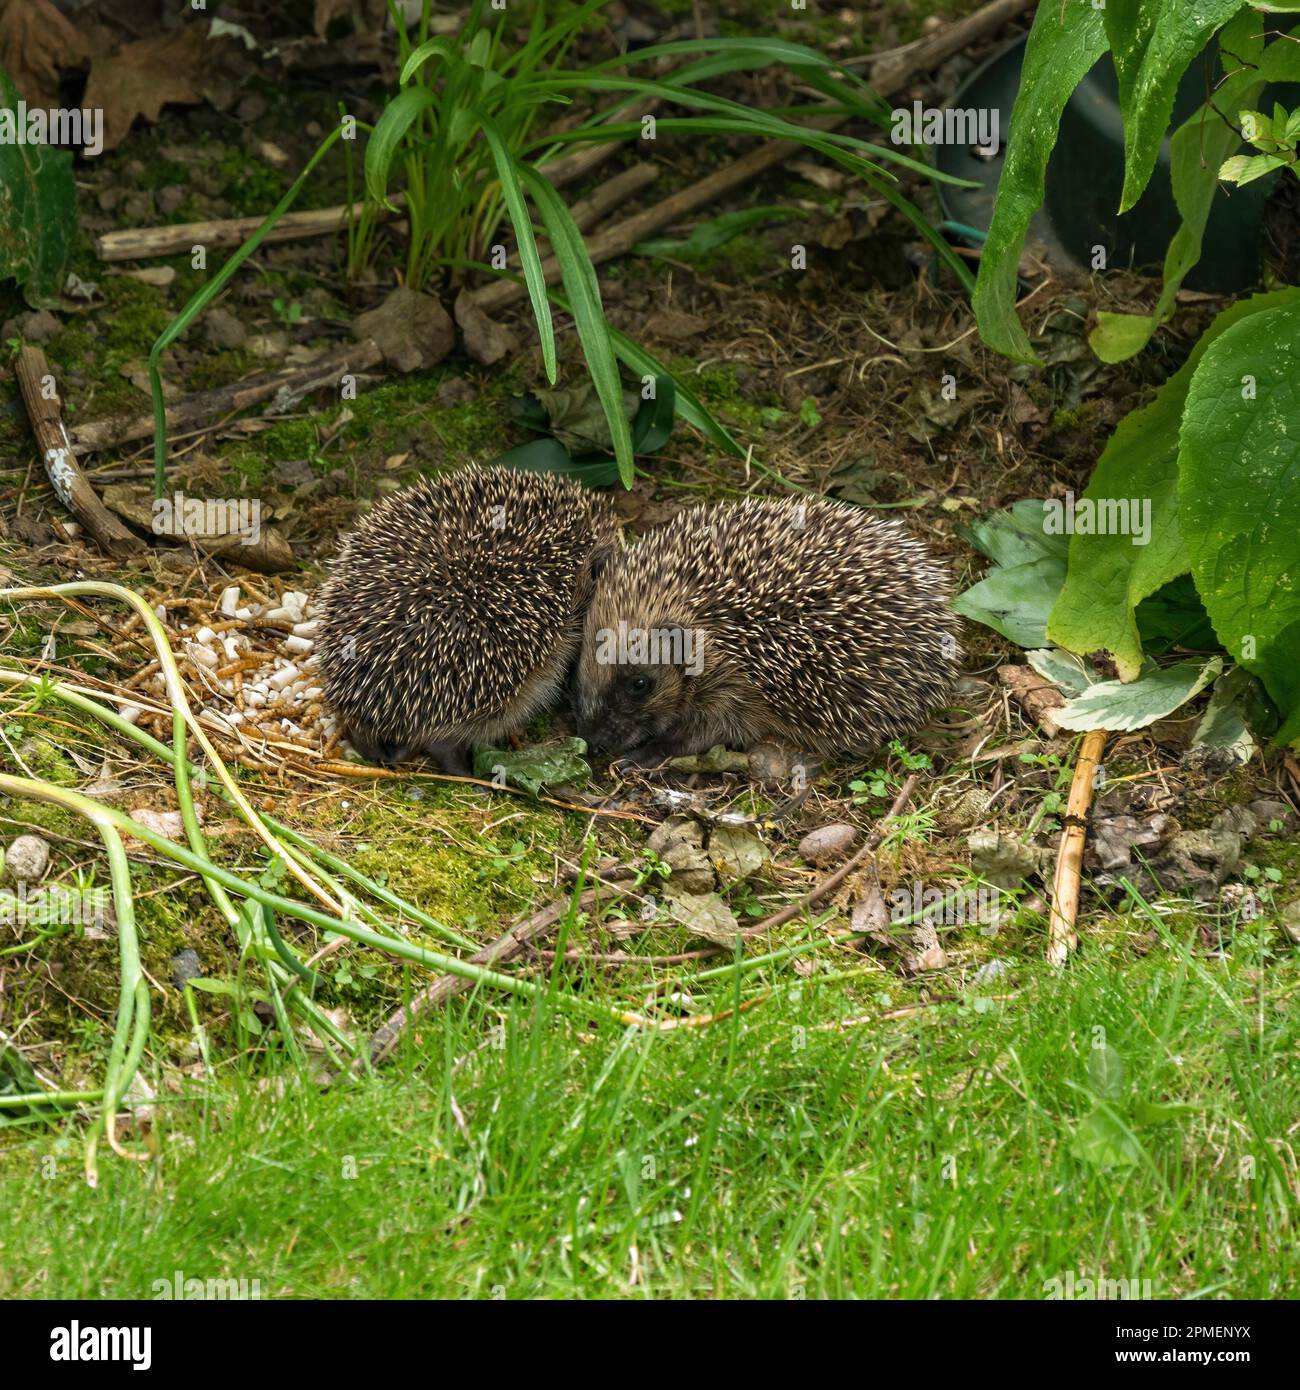 Two young hedgehogs Erinaceus europaeus foraging in English garden in daylight Stock Photo